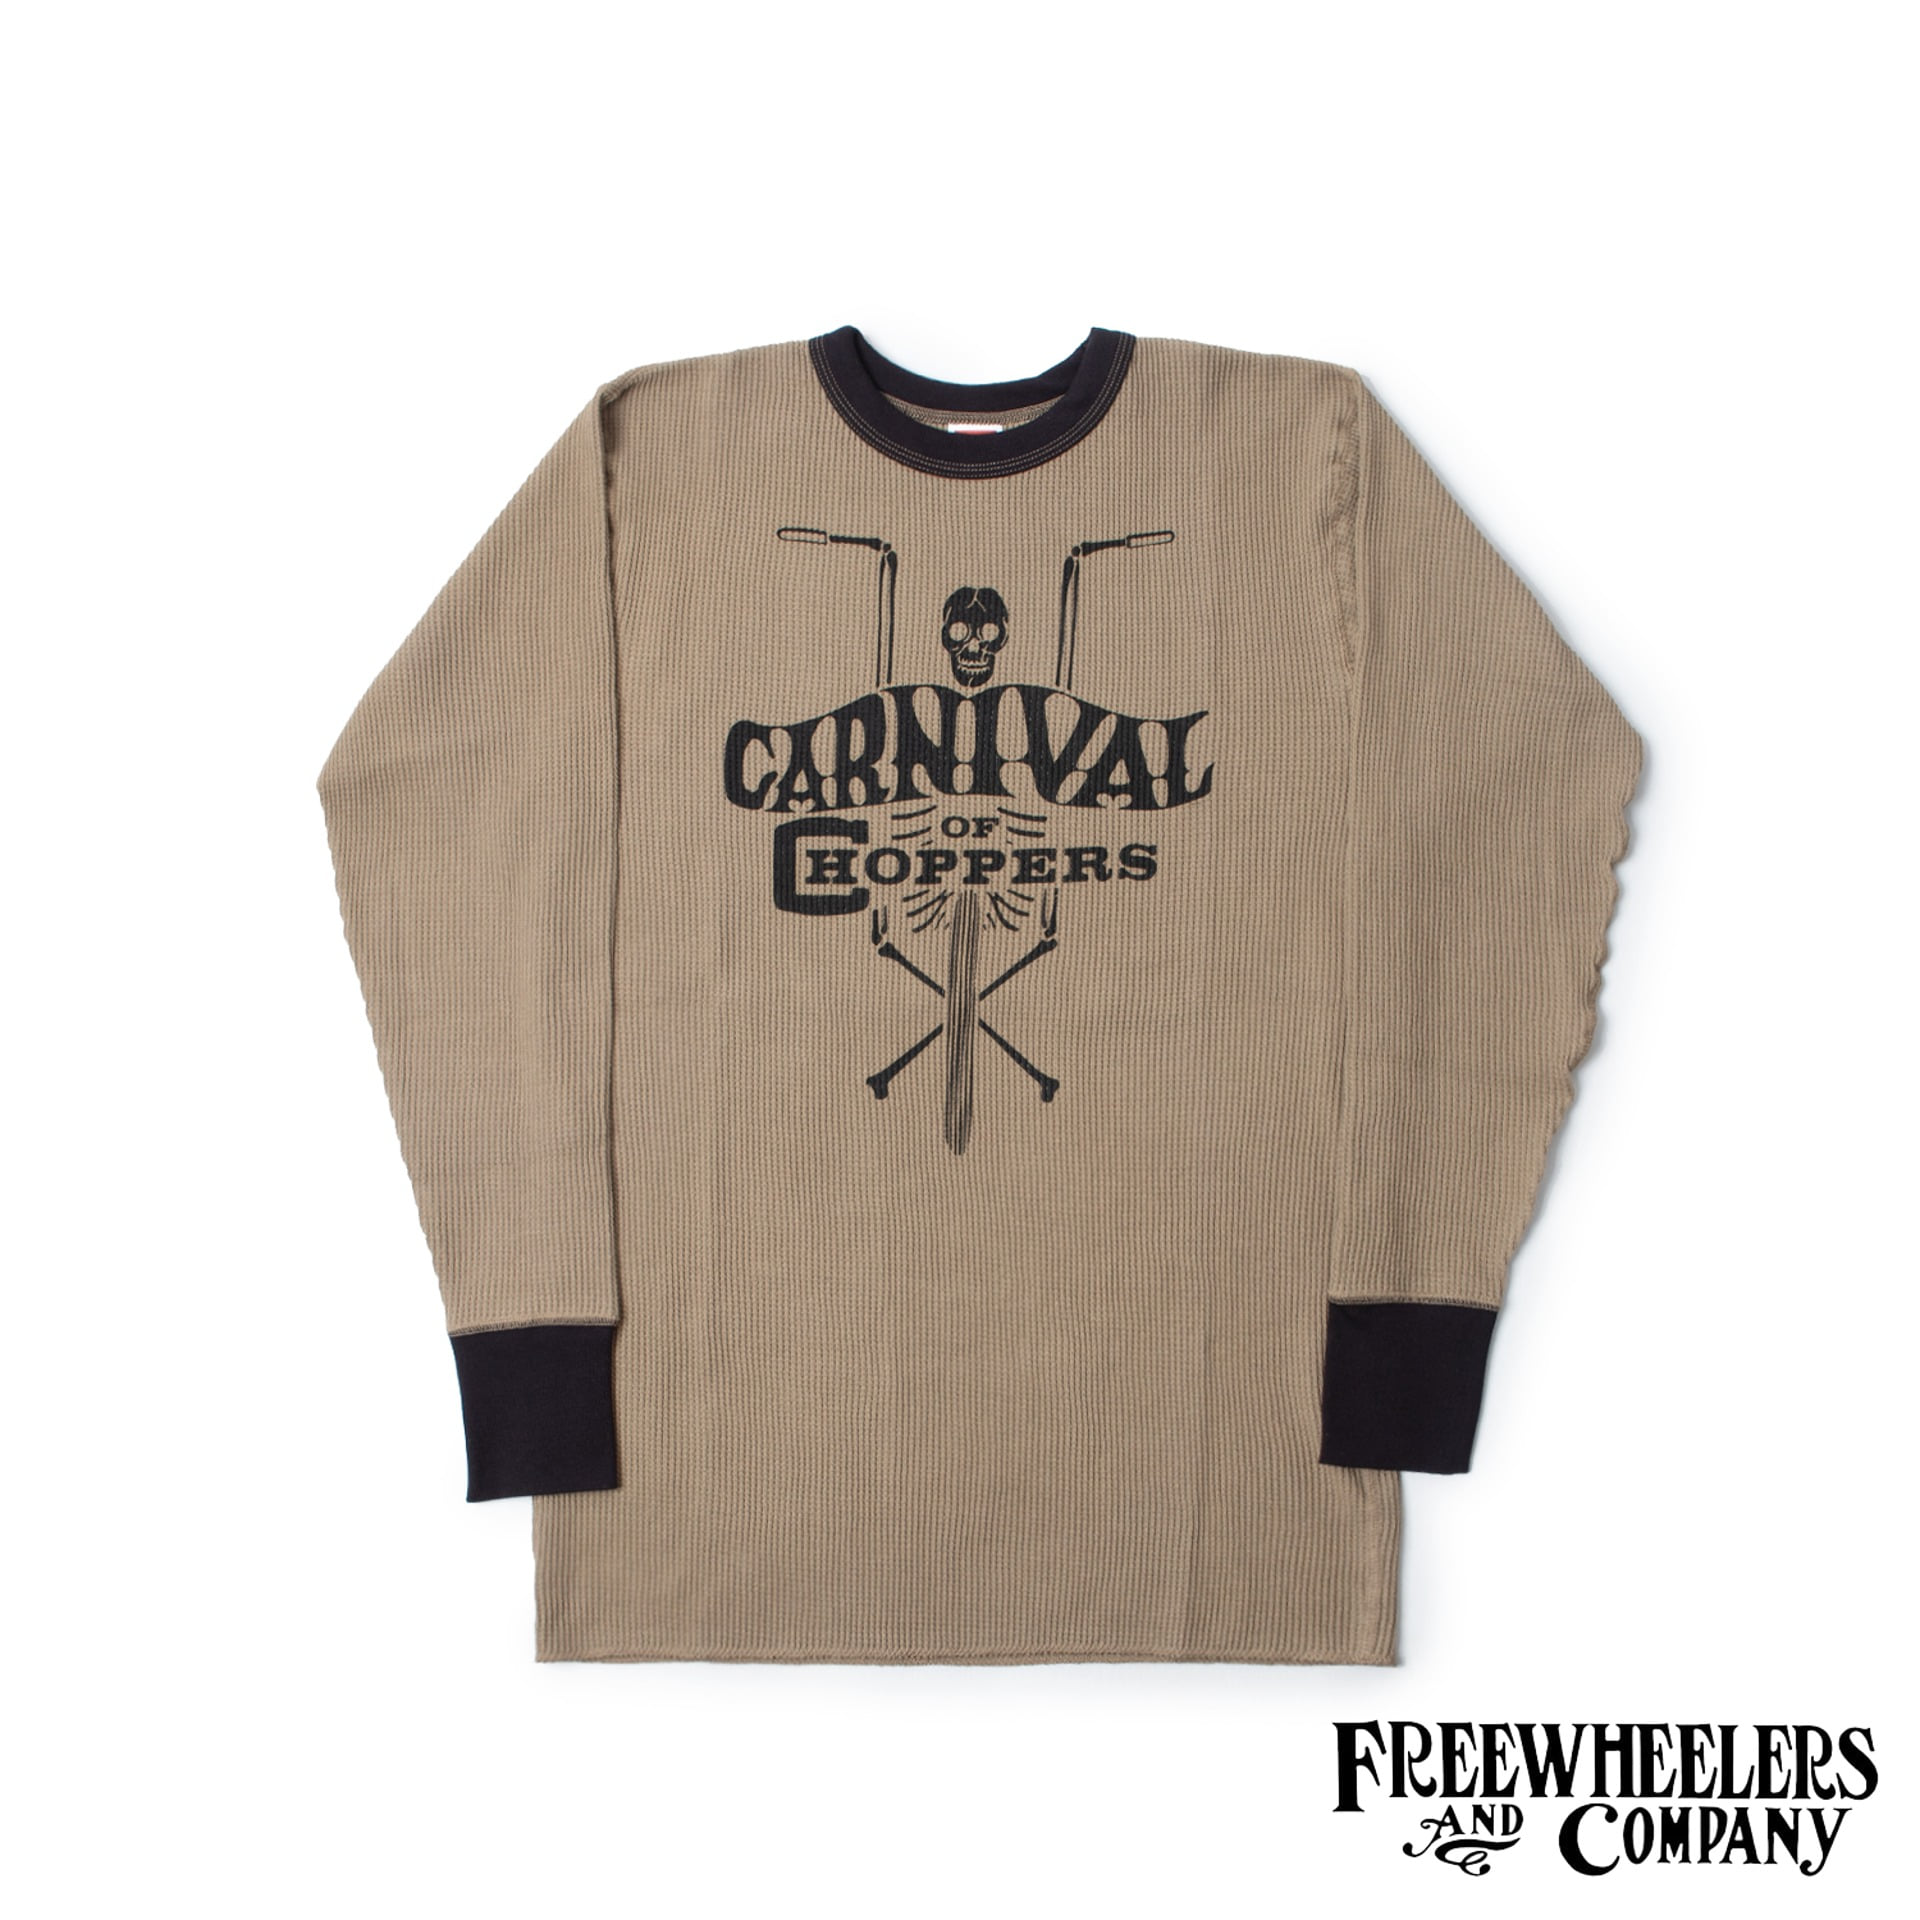 [POWER WEAR]1950s STYLE UNDERWEAR“CARNIVAL OF CHOPPERS”CREW NECKED THERMAL LONG SLEEVE SHIRT (Oil Stain x Black)